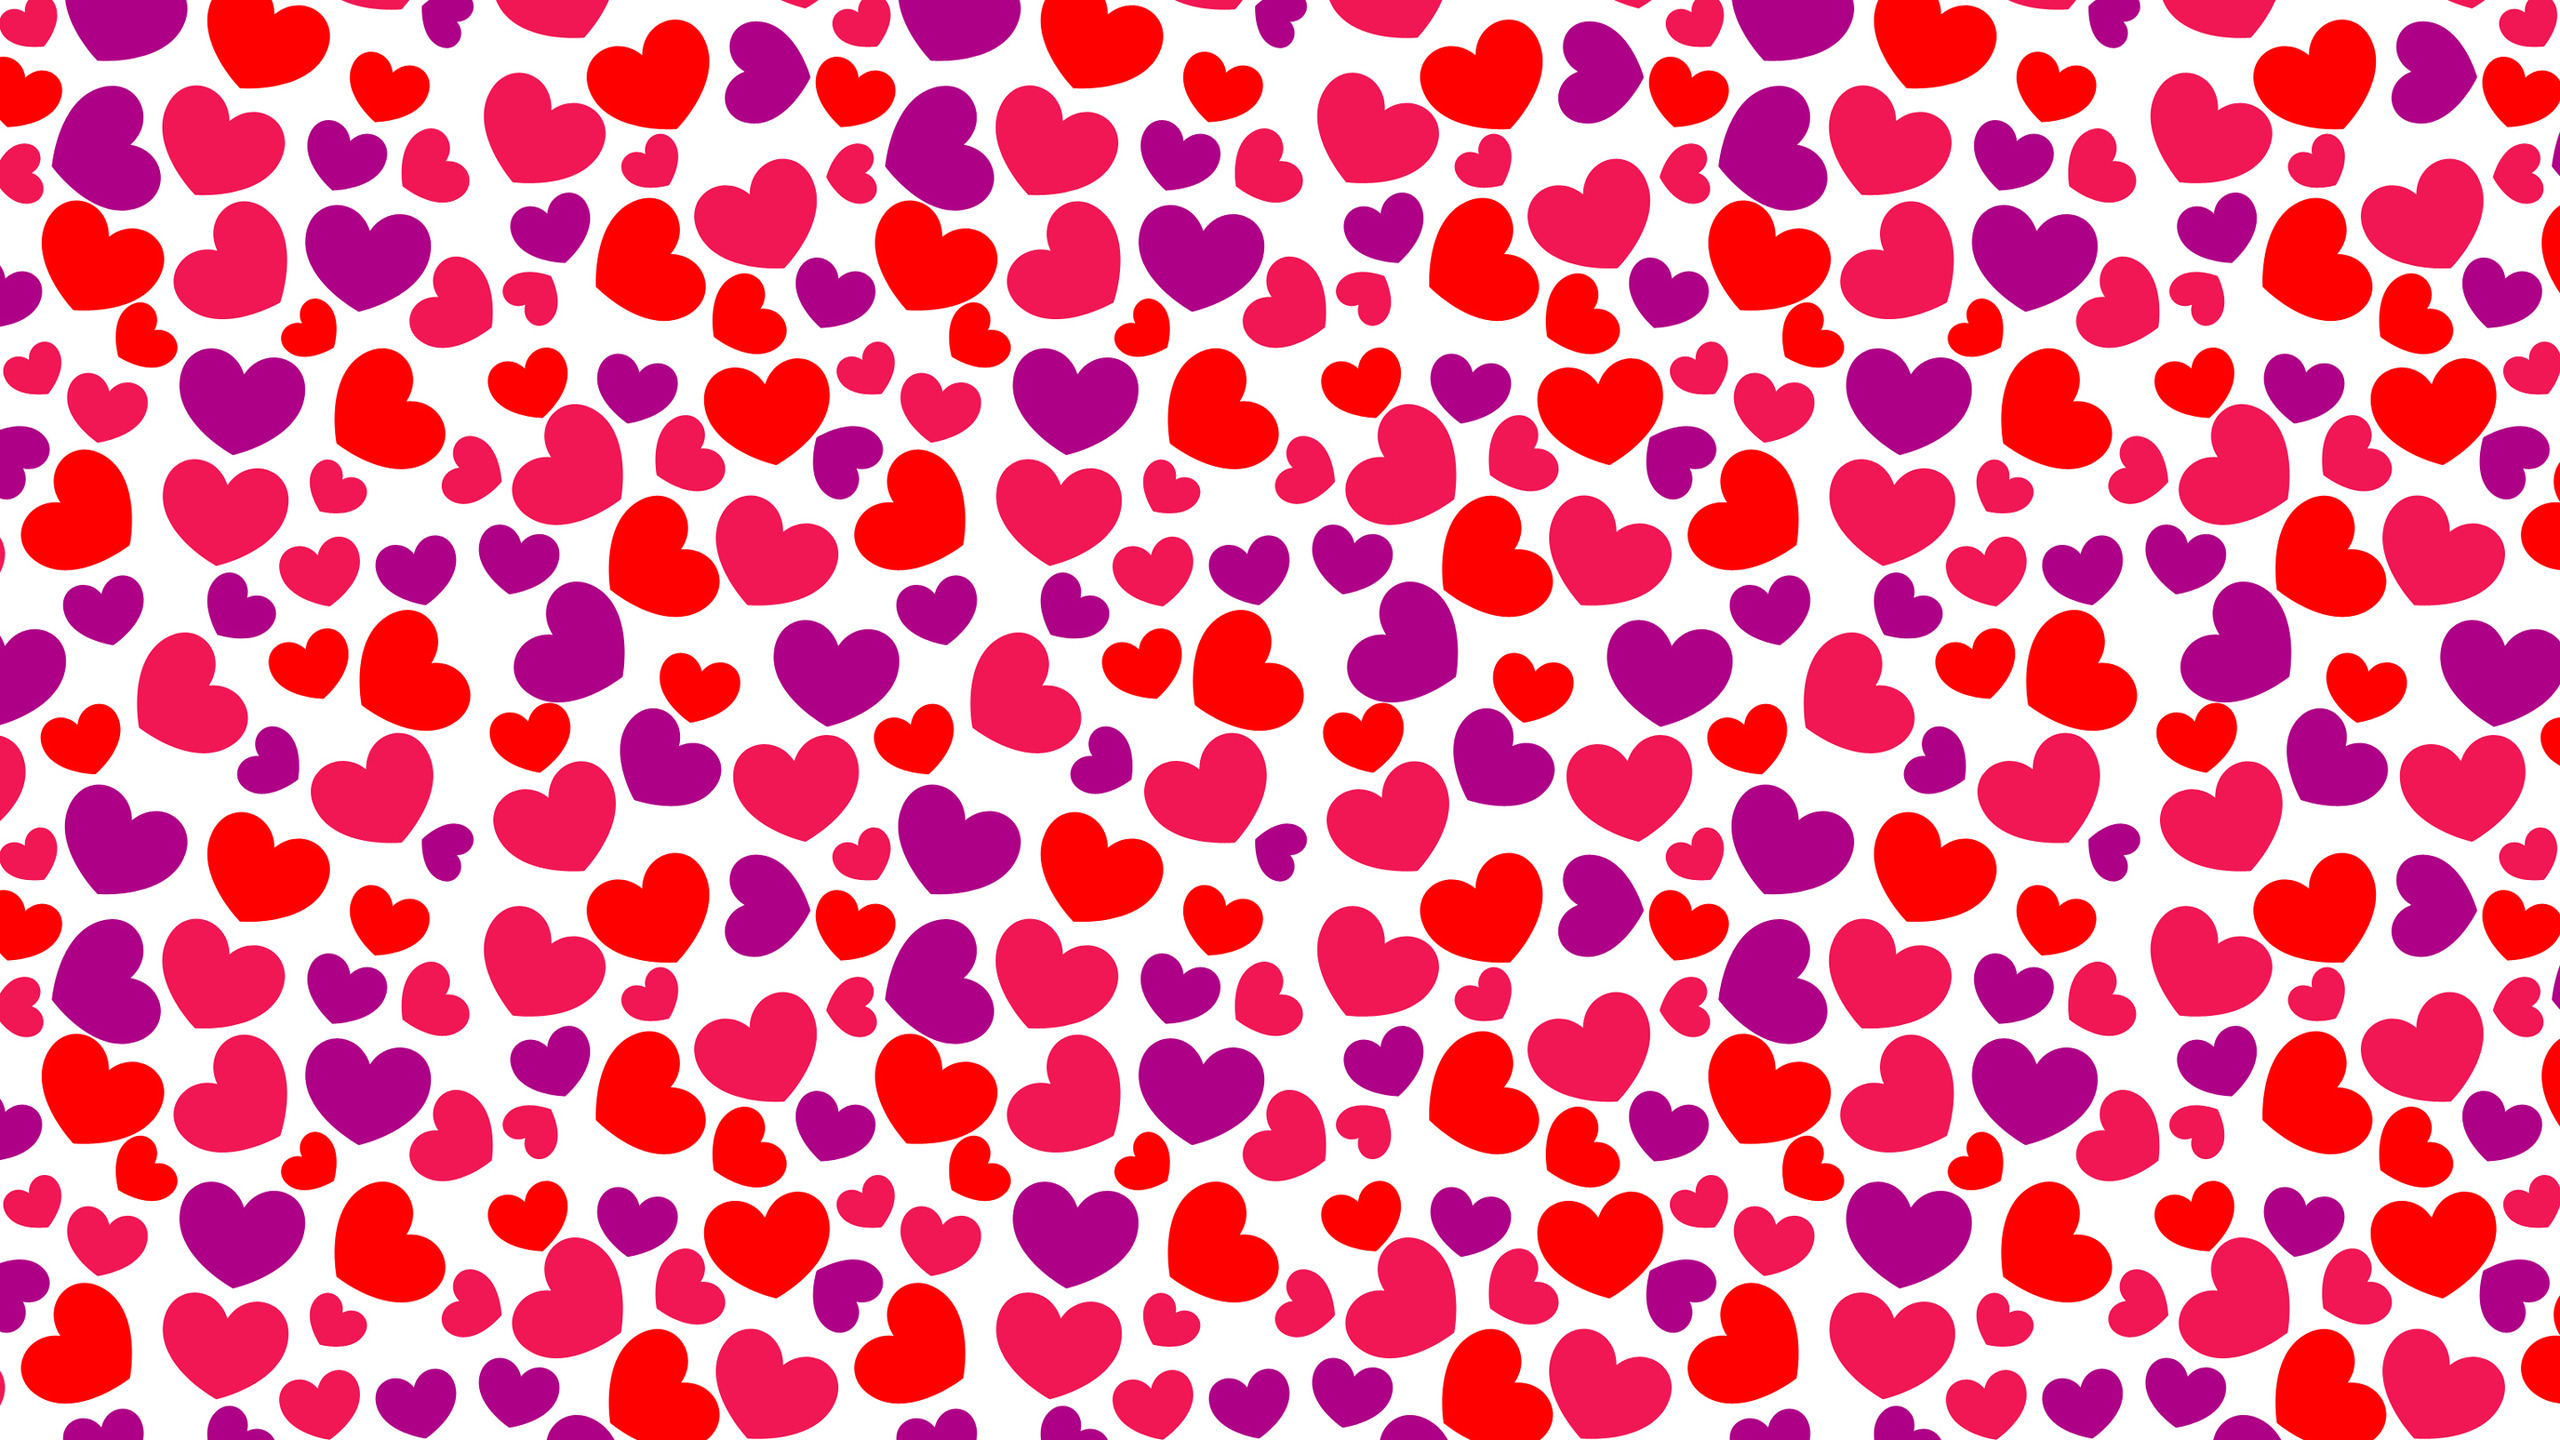 Awesome heart backgrounds